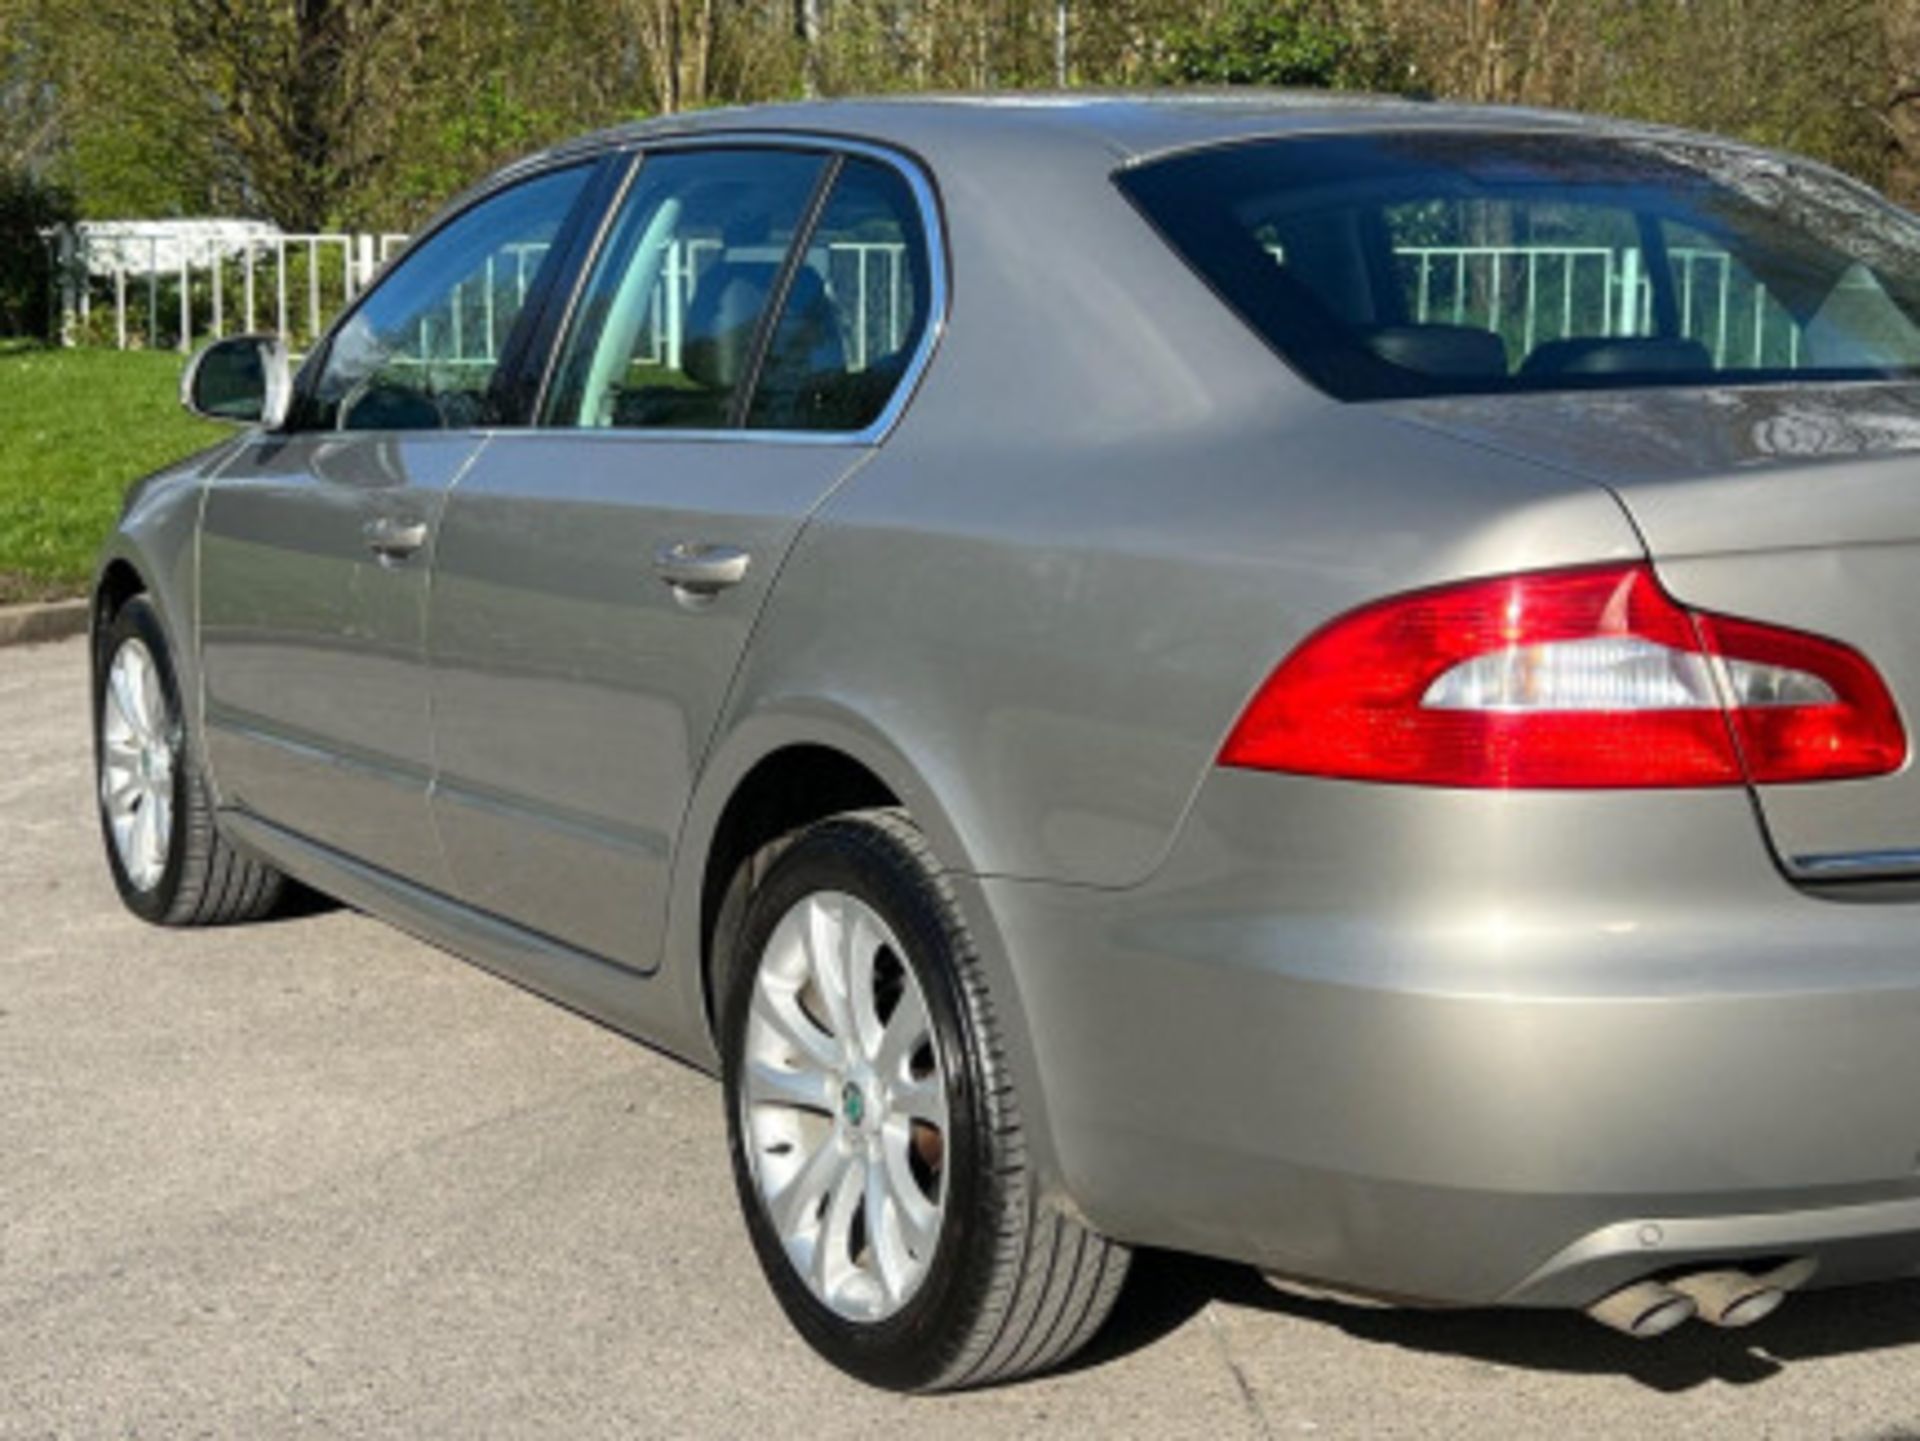 >>--NO VAT ON HAMMER--<<STYLISH AND RELIABLE SKODA SUPERB 1.6 TDI S GREENLINE II EURO 5 - Image 59 of 141